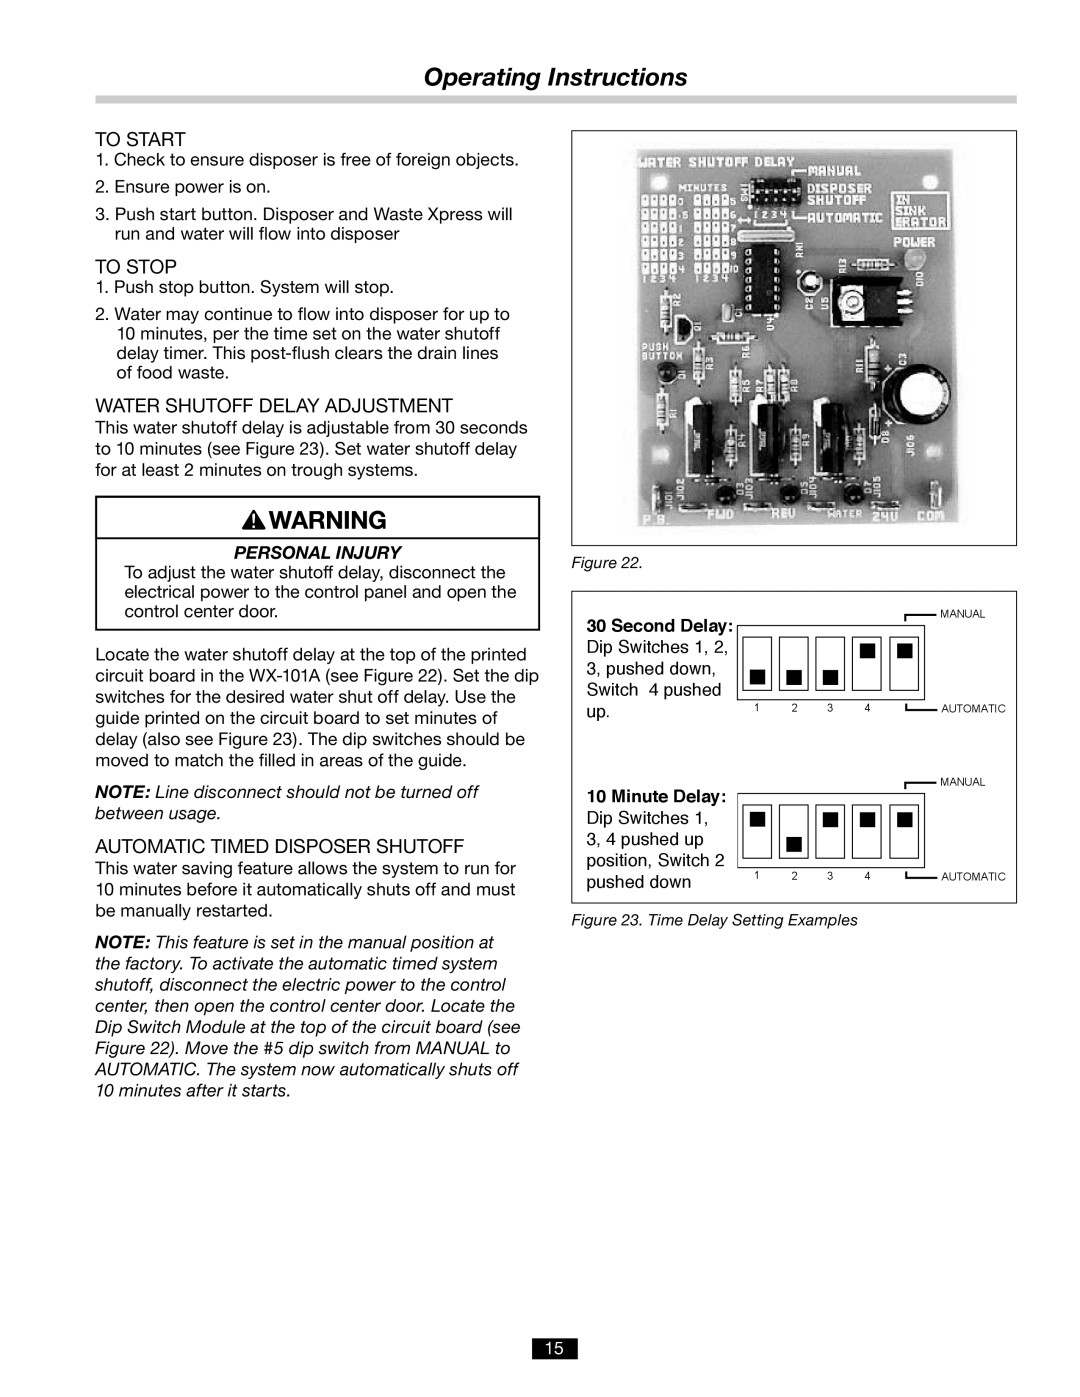 InSinkErator 14481 manual Operating Instructions, To Start, To Stop, Water Shutoff Delay Adjustment, Personal Injury 